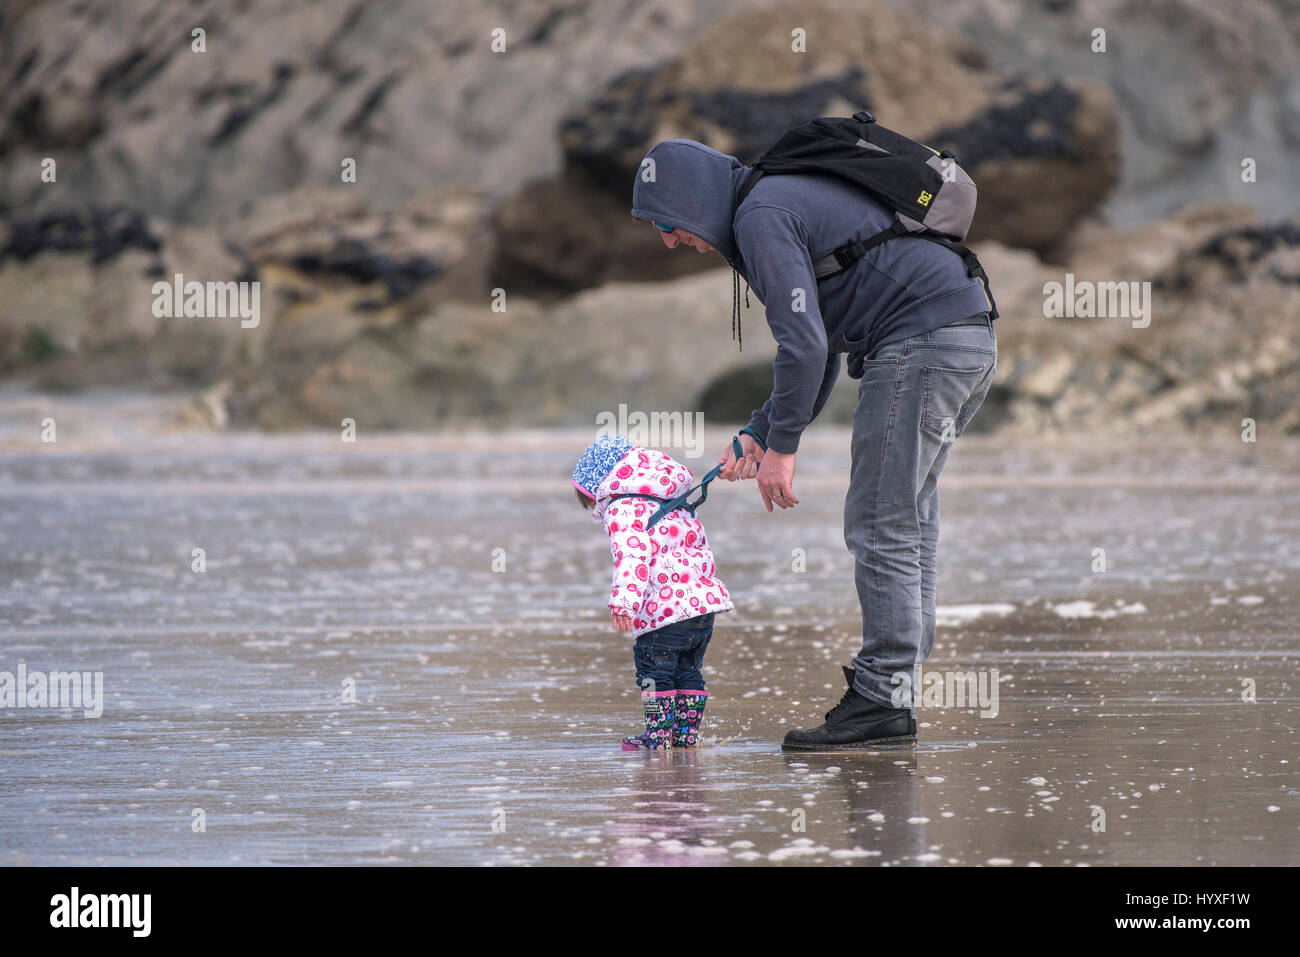 Father Daughter Child Toddler Parenting Family activity Sea Seaside Learning New experience Parenting Care Caring Stock Photo